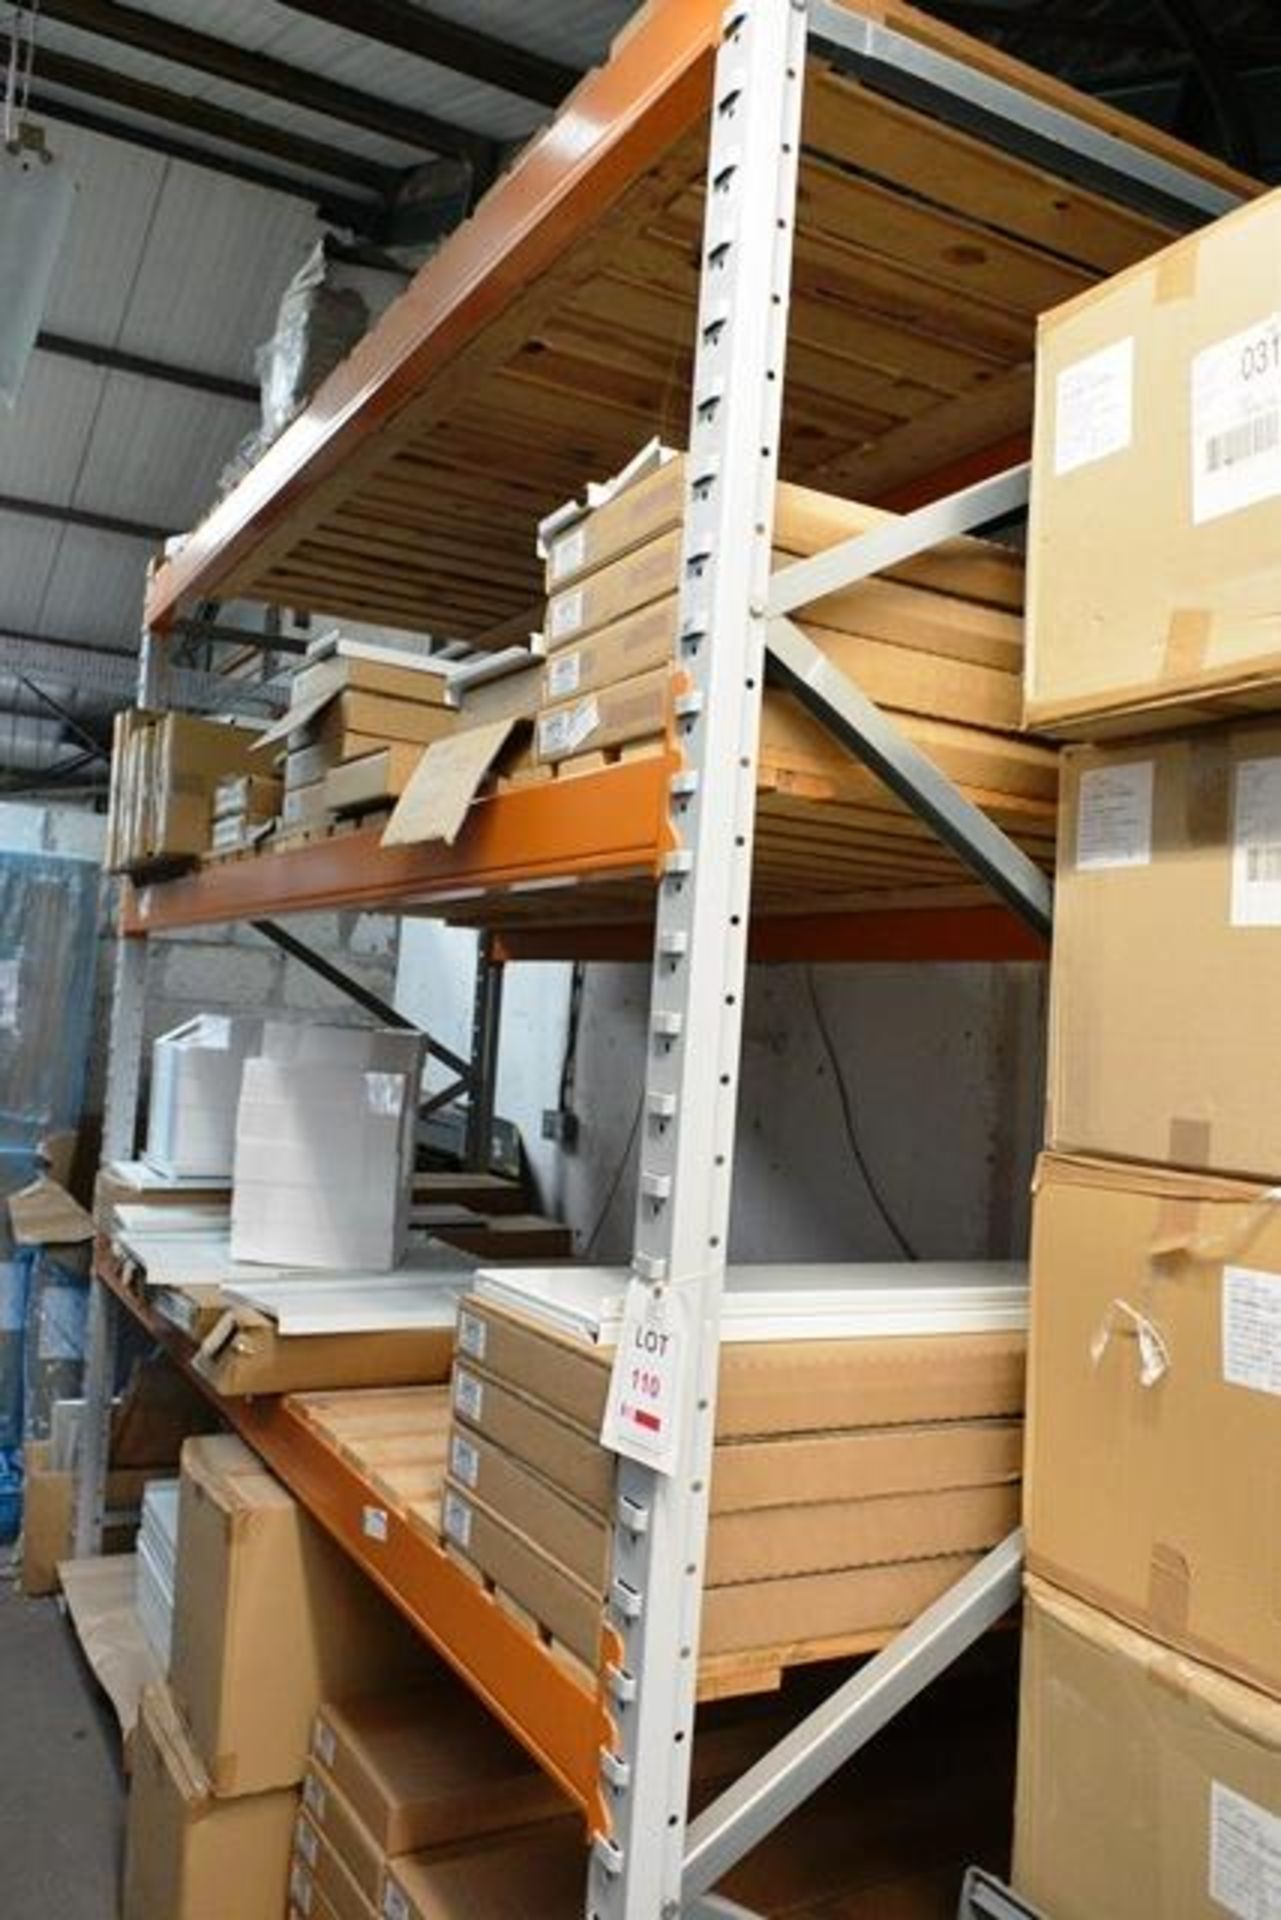 One bay of adjustable boltless pallet racking, approx height 2.4m, approx 2.9m width per pay (